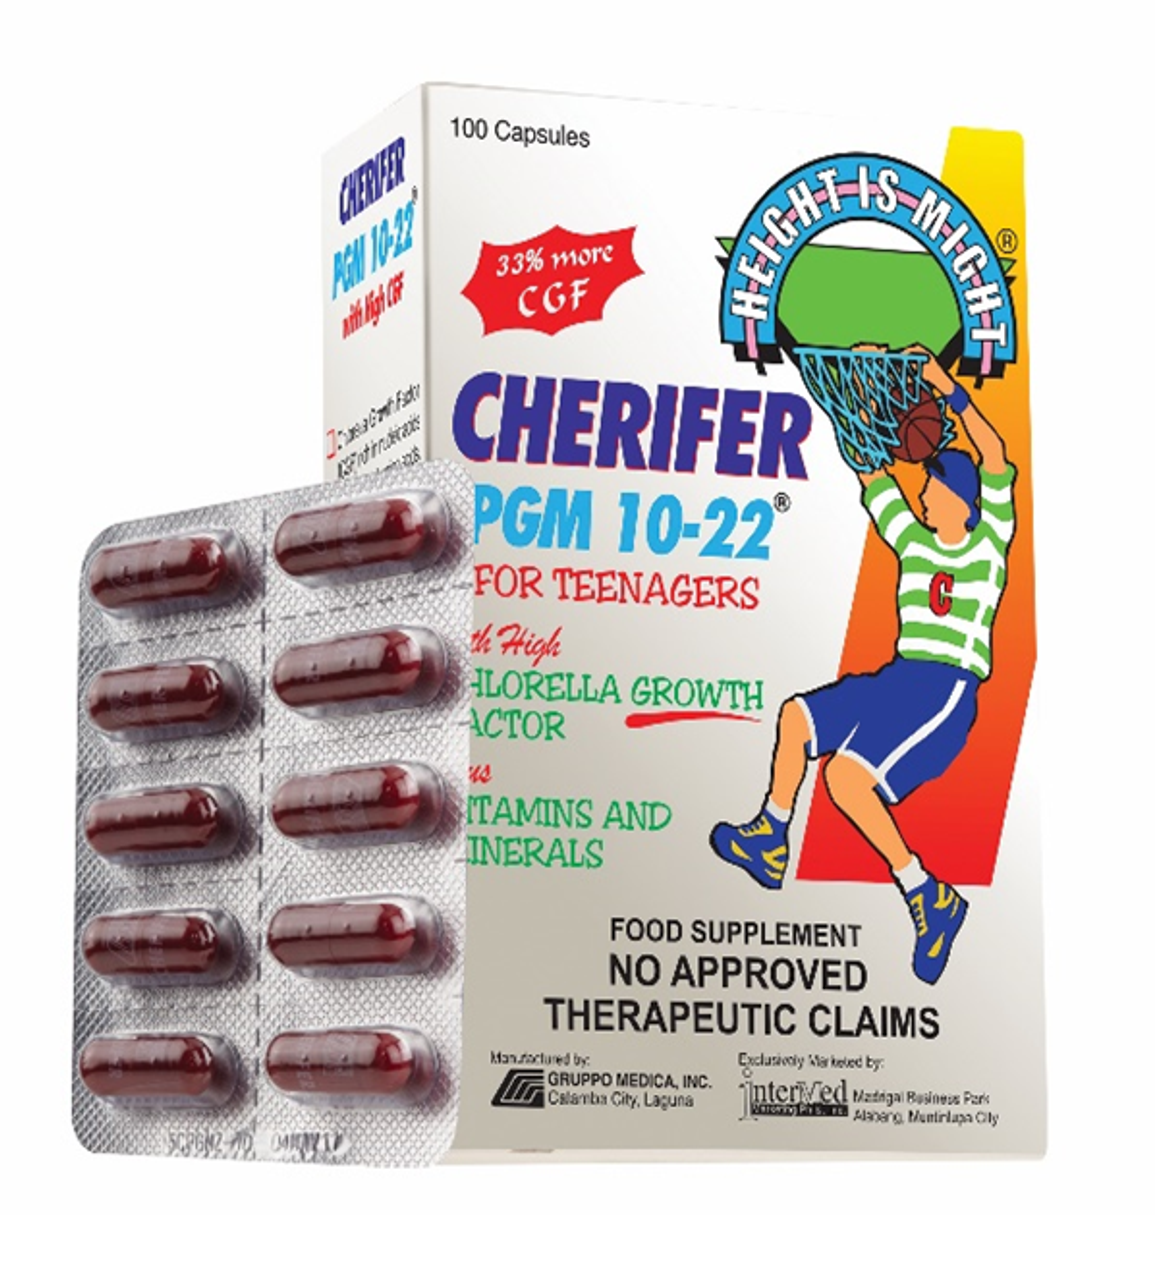 Cherifer PGM 10- 22® For Teenagers with Zinc 200mg Capsule Zuellig ...